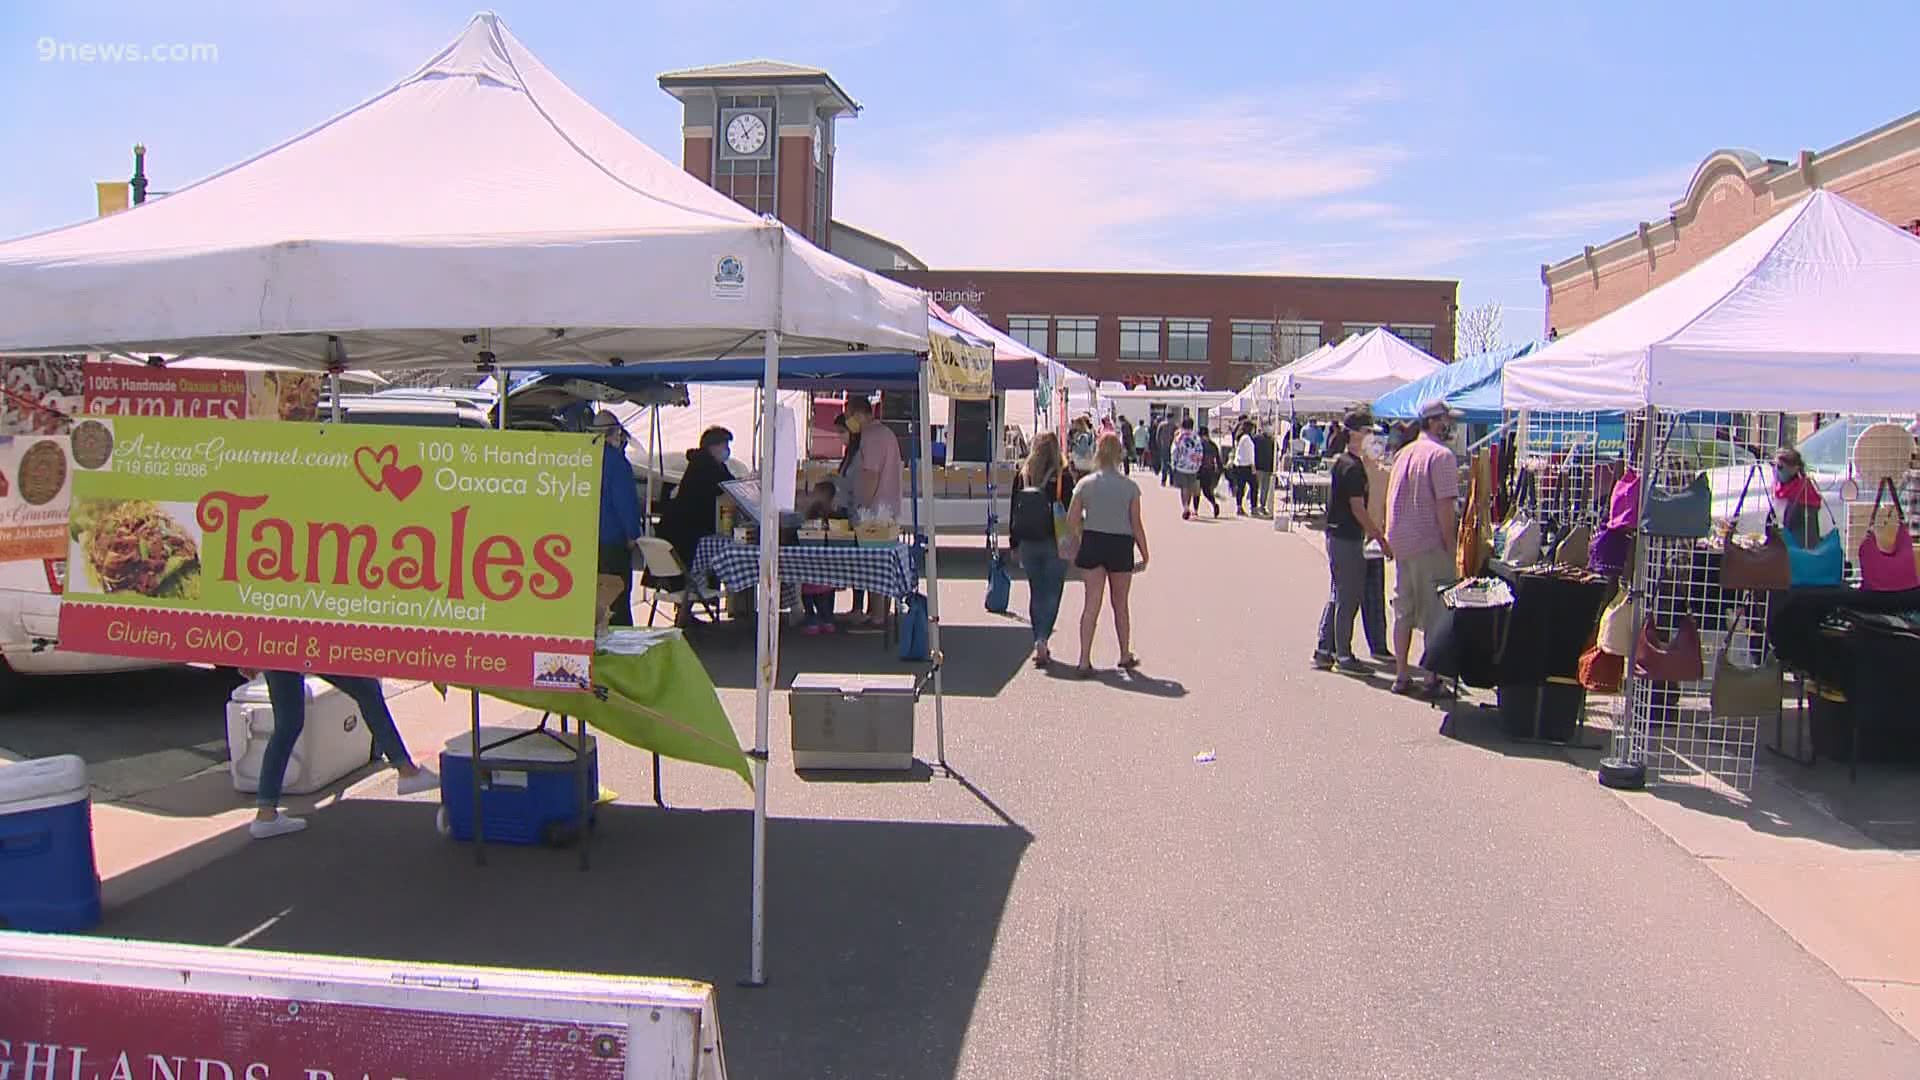 May is the start of farmers market season in Colorado. But it can't just be business as usual. The Colorado Farmers Market Association has new standards for opening.